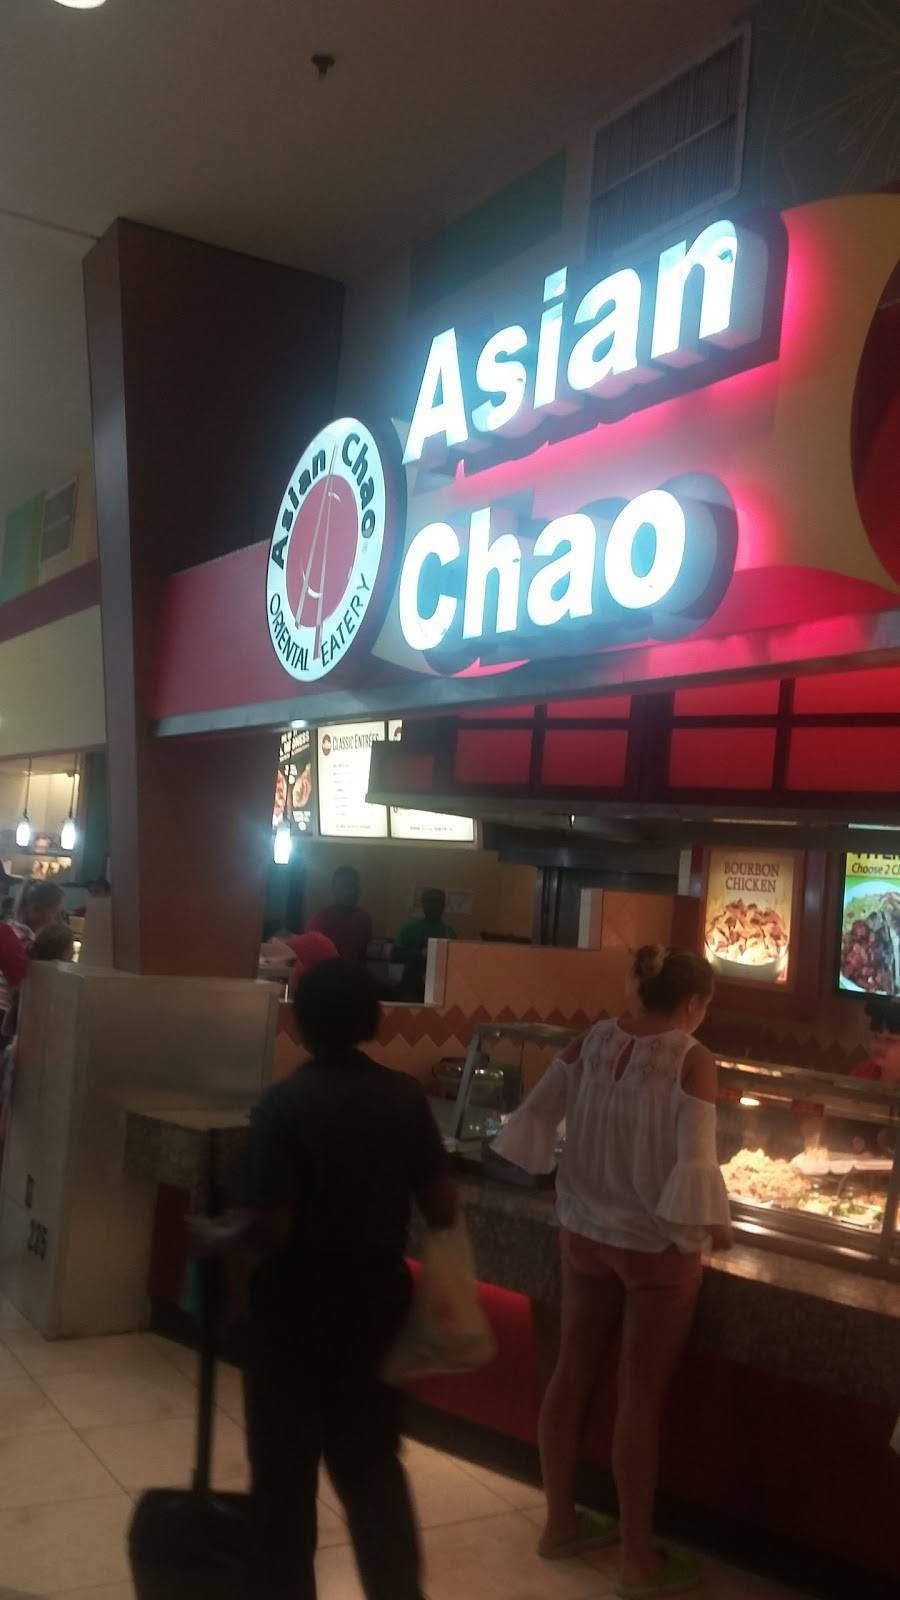 Asian Chao, Sawgrass Mills Mall, Sunrise, Florida - Picture of